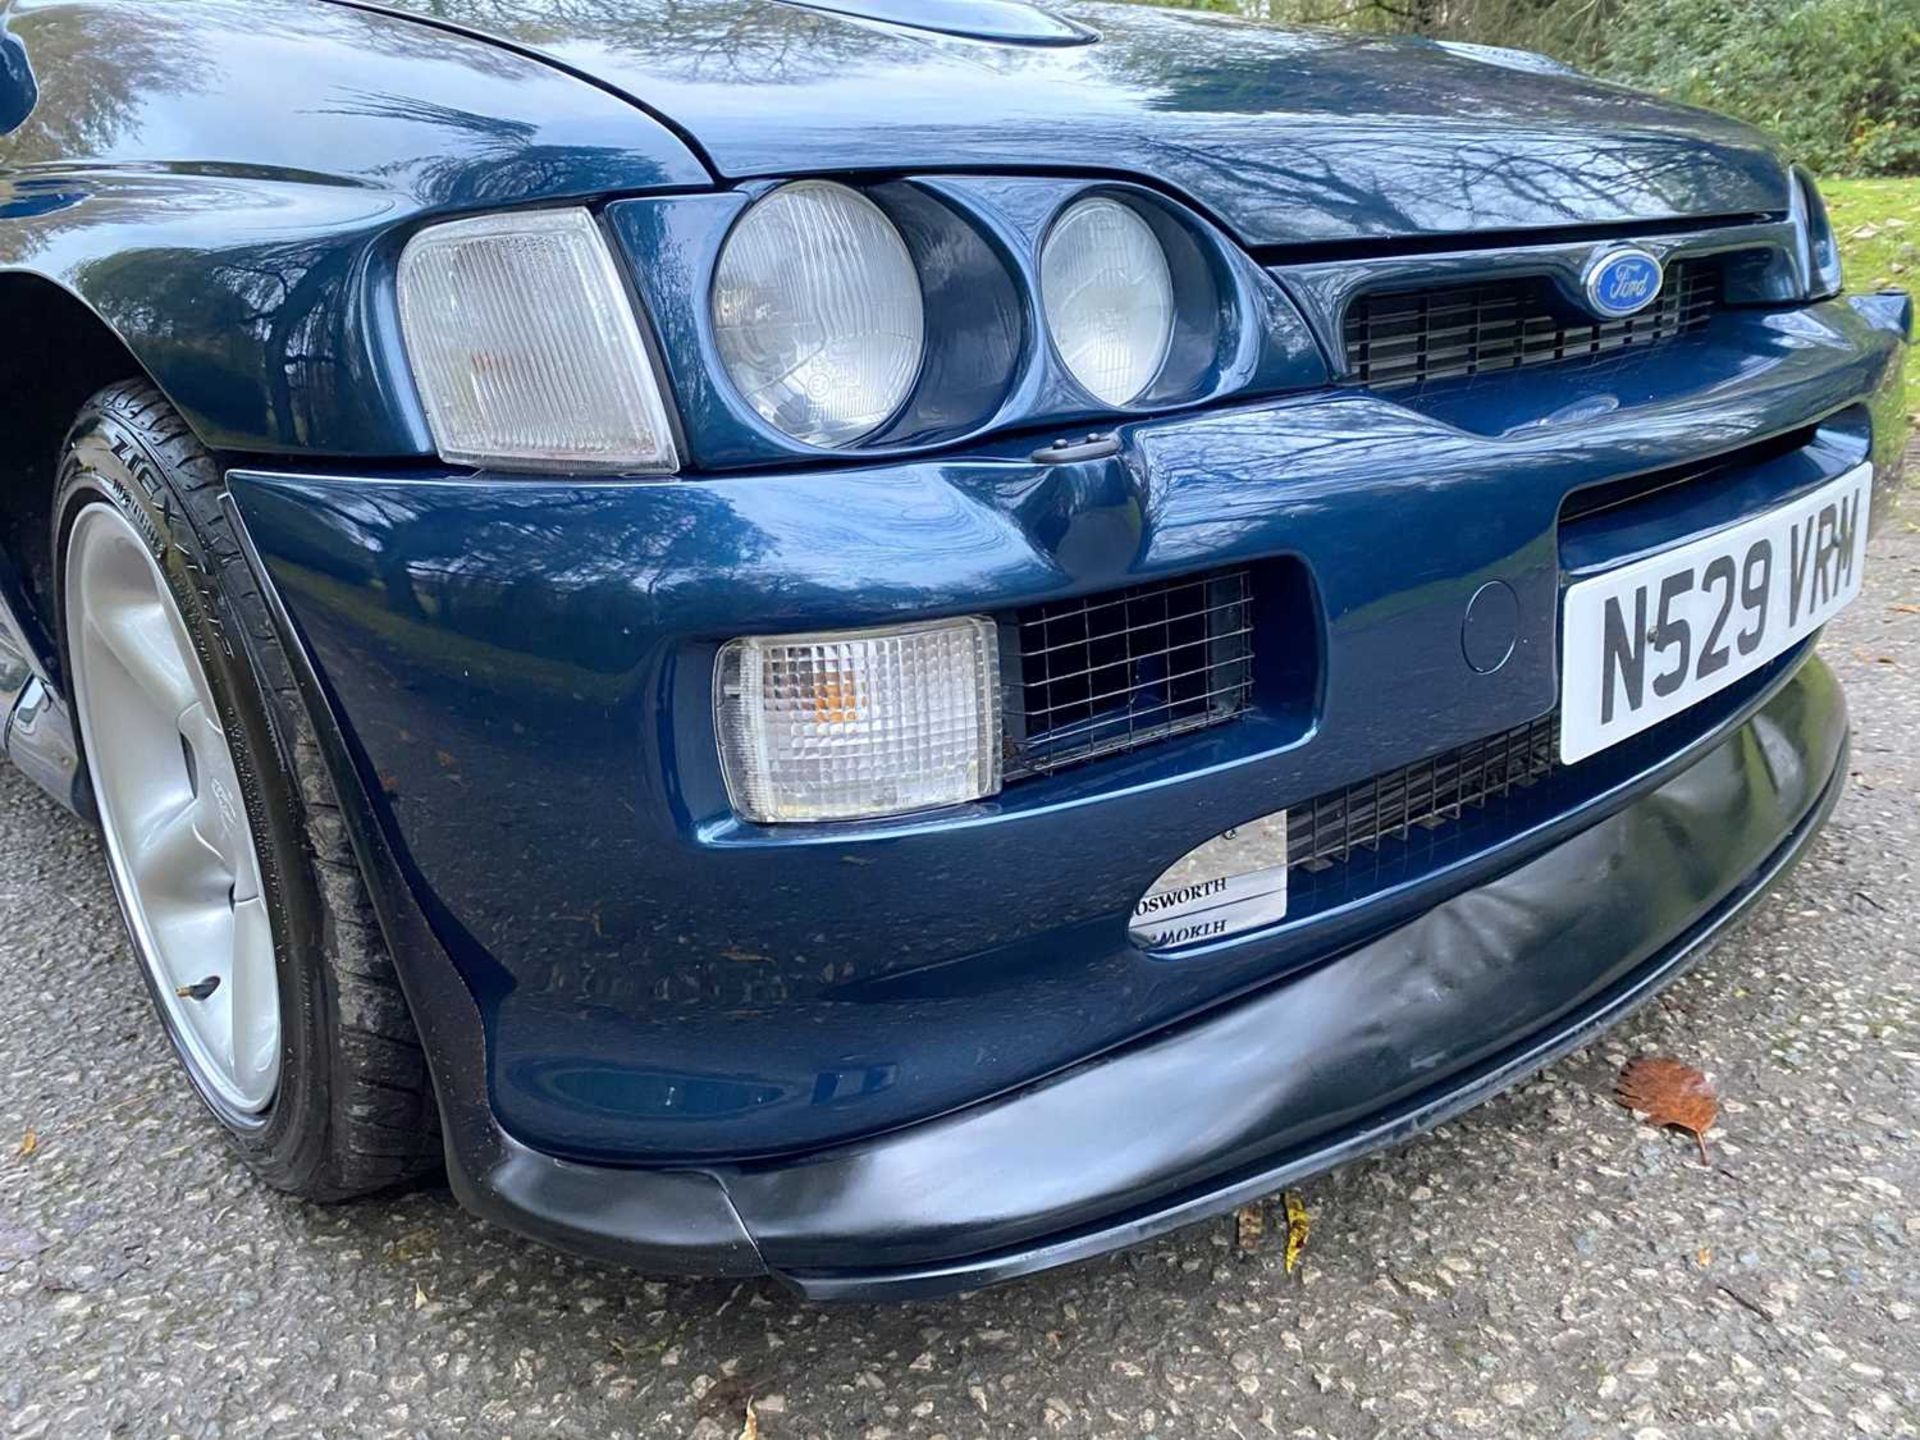 1995 Ford Escort RS Cosworth LUX Only 56,000 miles, finished in rare Petrol Blue - Image 89 of 98